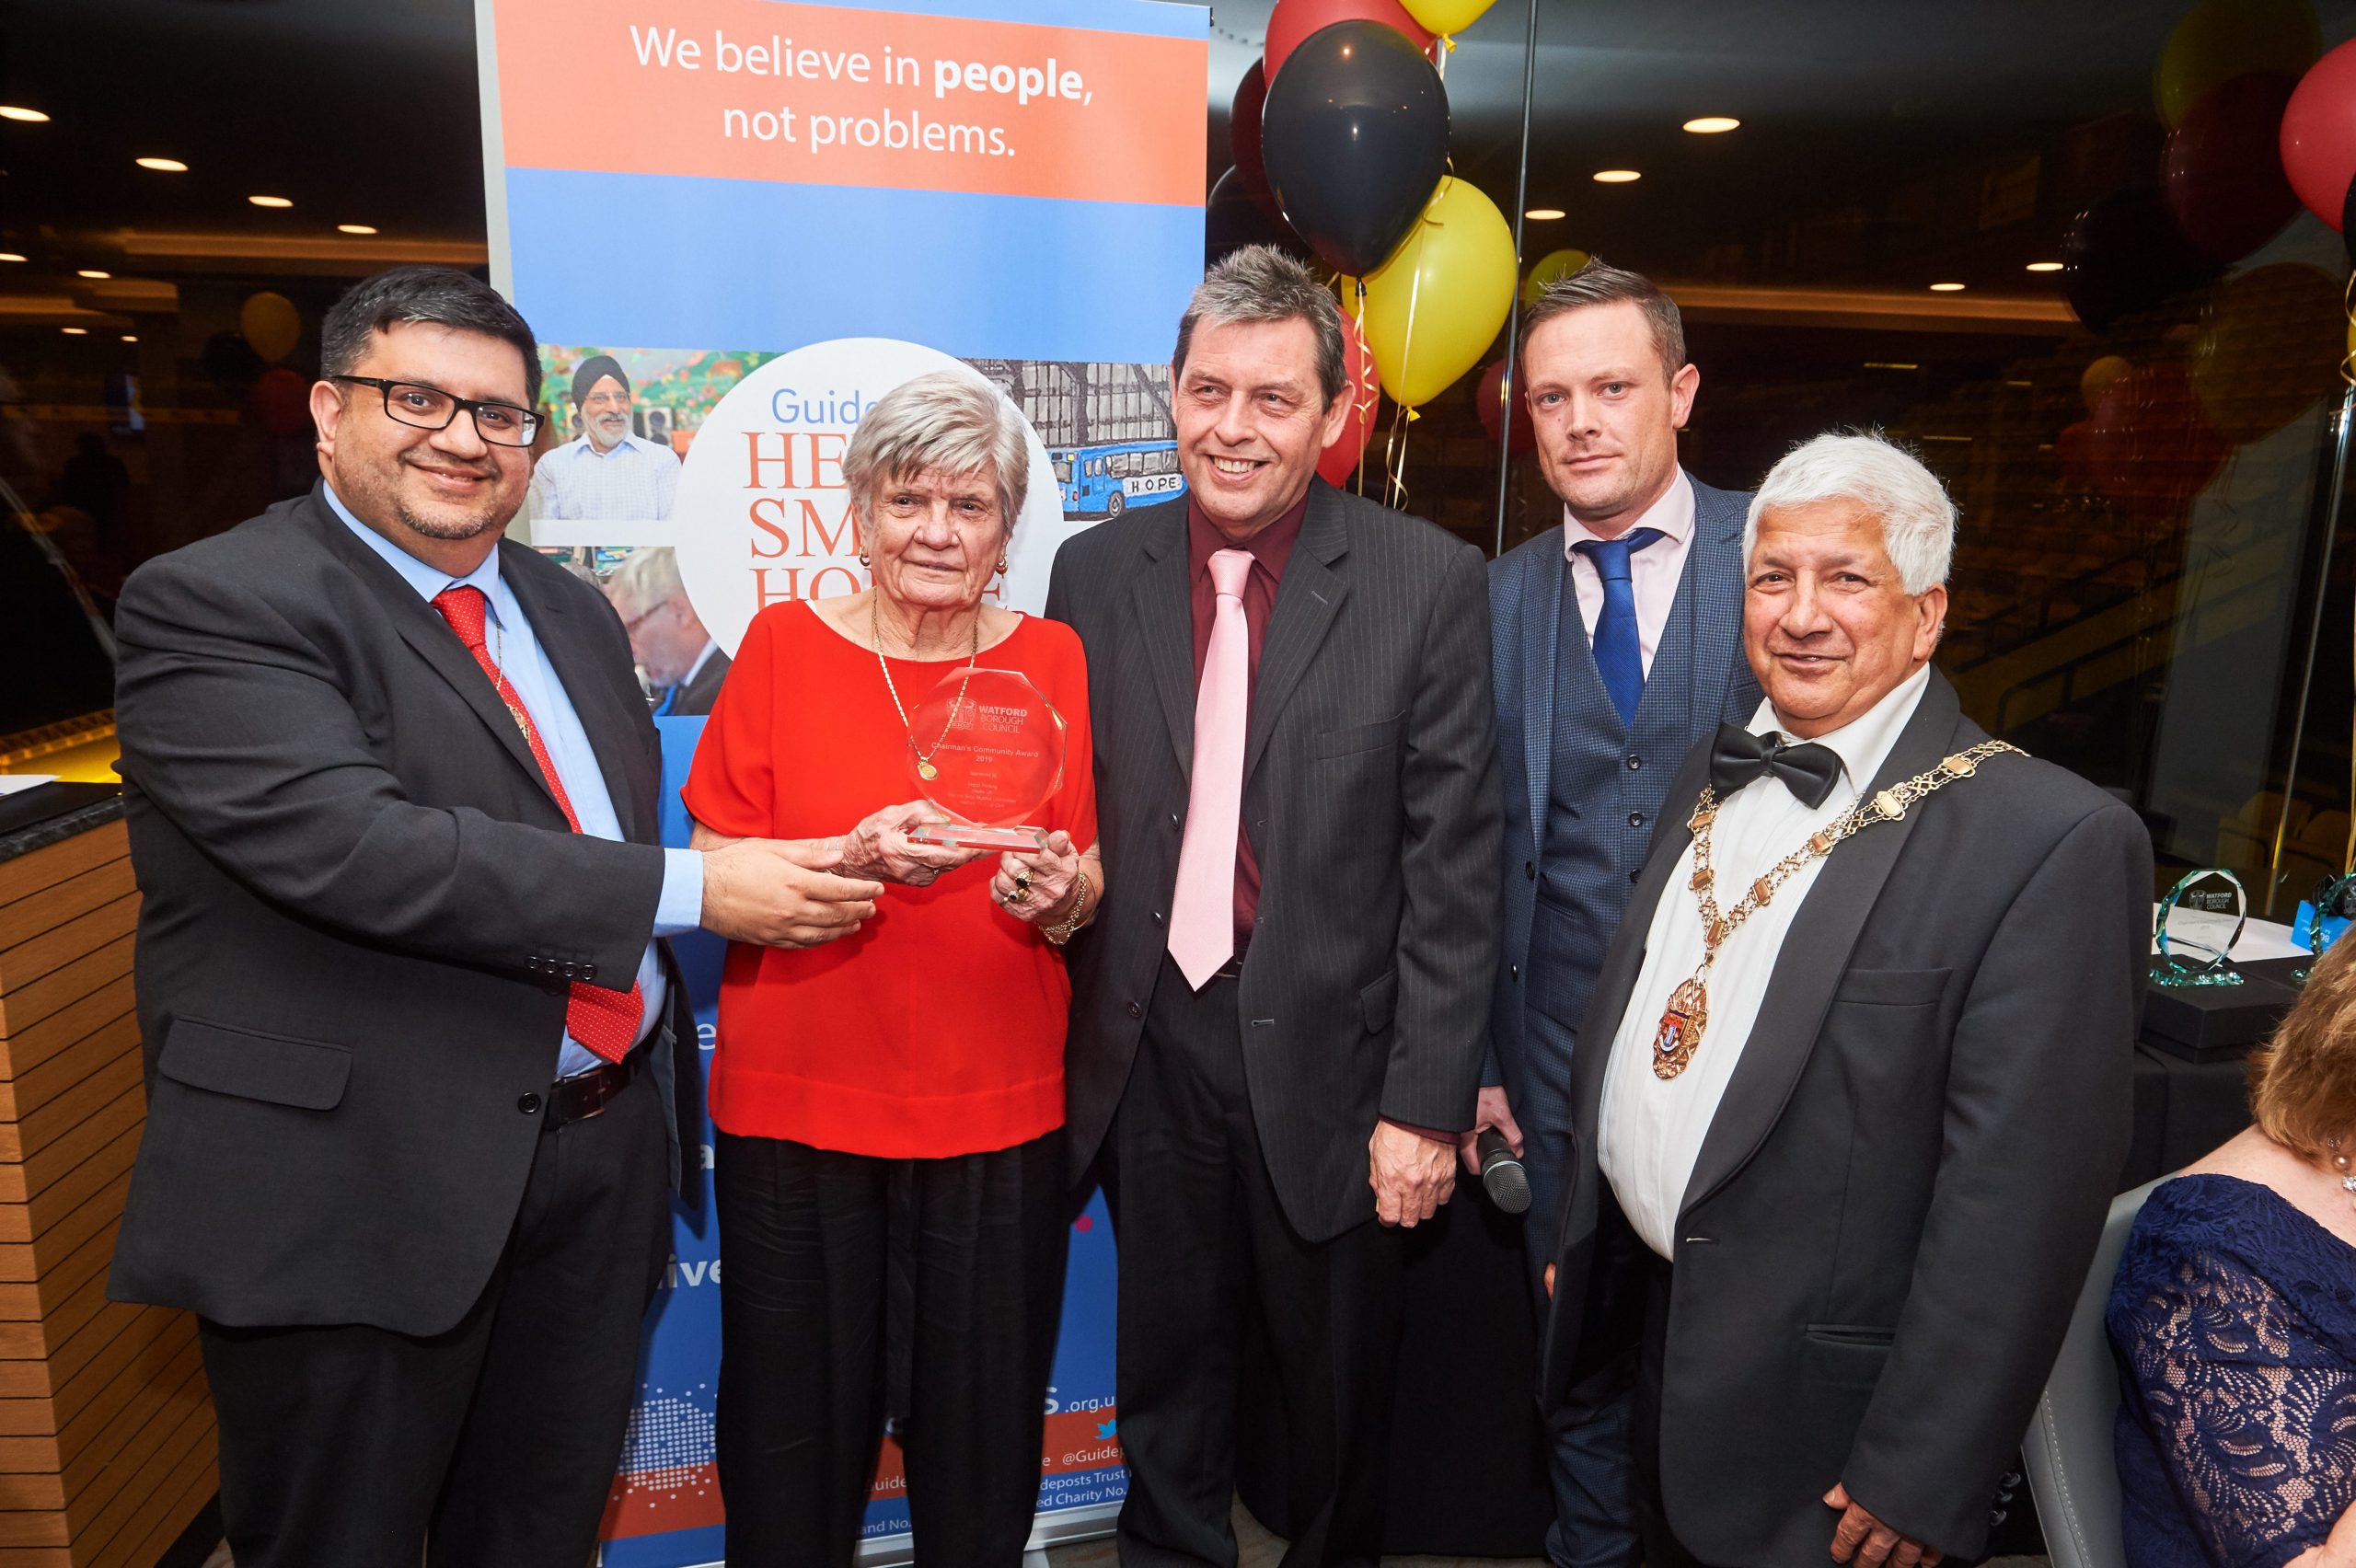 Chairman’s Community Awards Recognises Local People And Raises Money For Charity